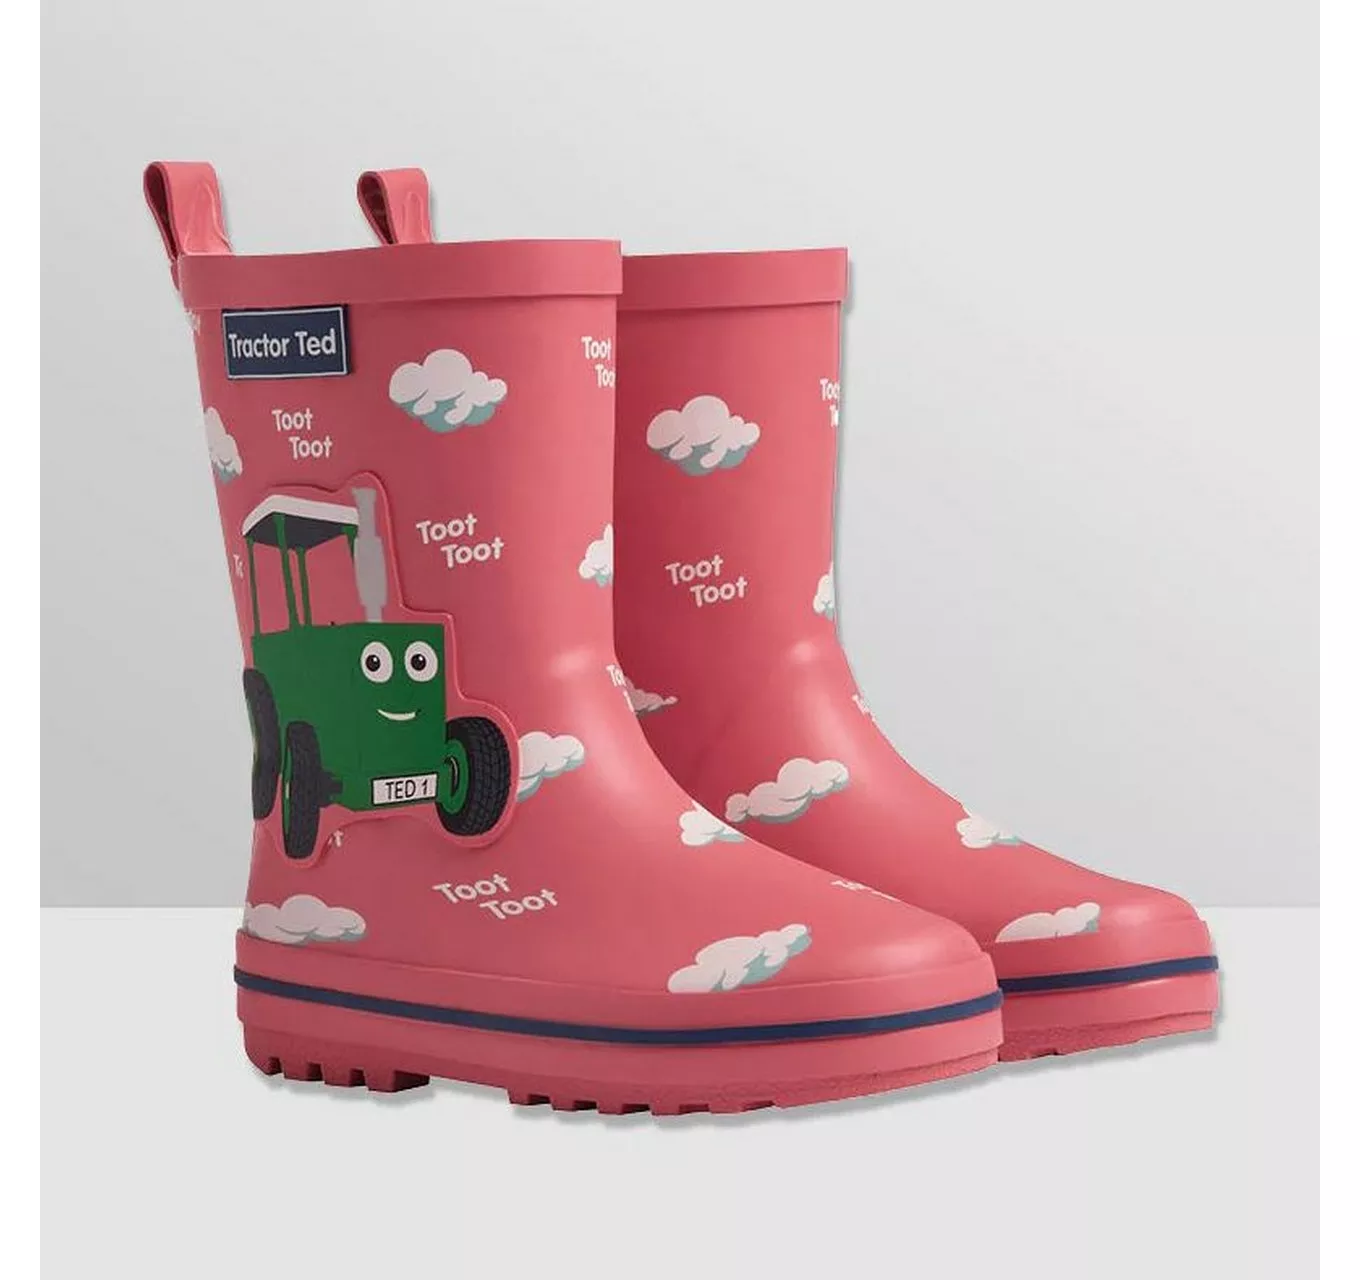 Tractor Ted Toot! Wellies 8